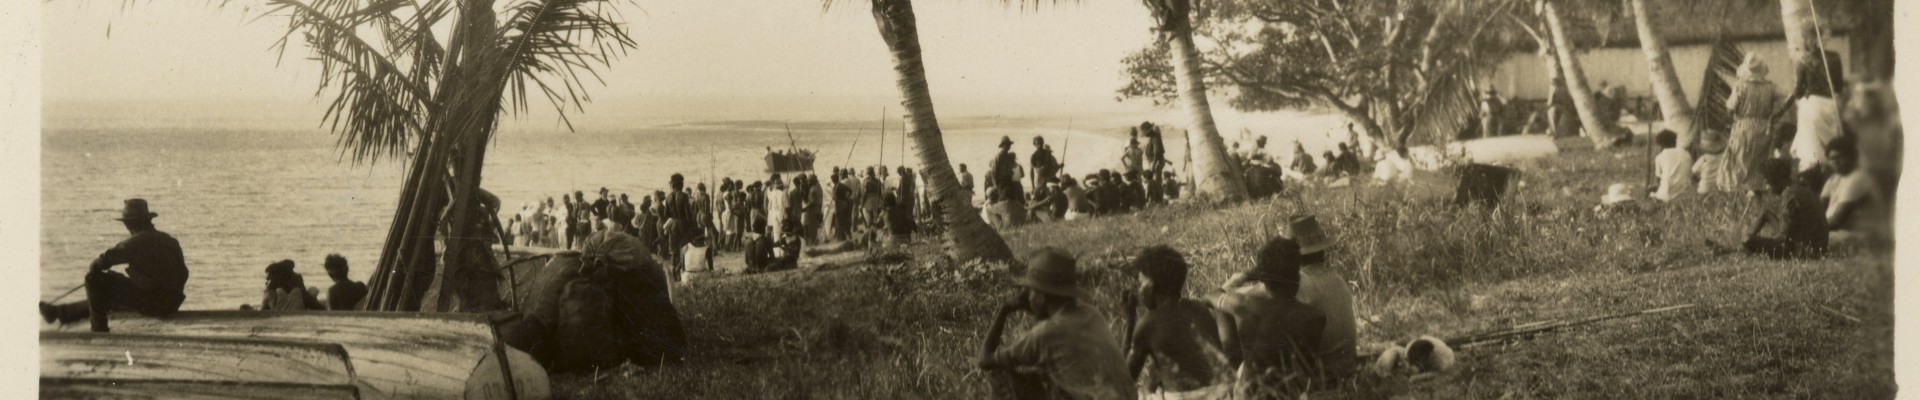 Crowds gathered on the beach at Palm Island Queensland